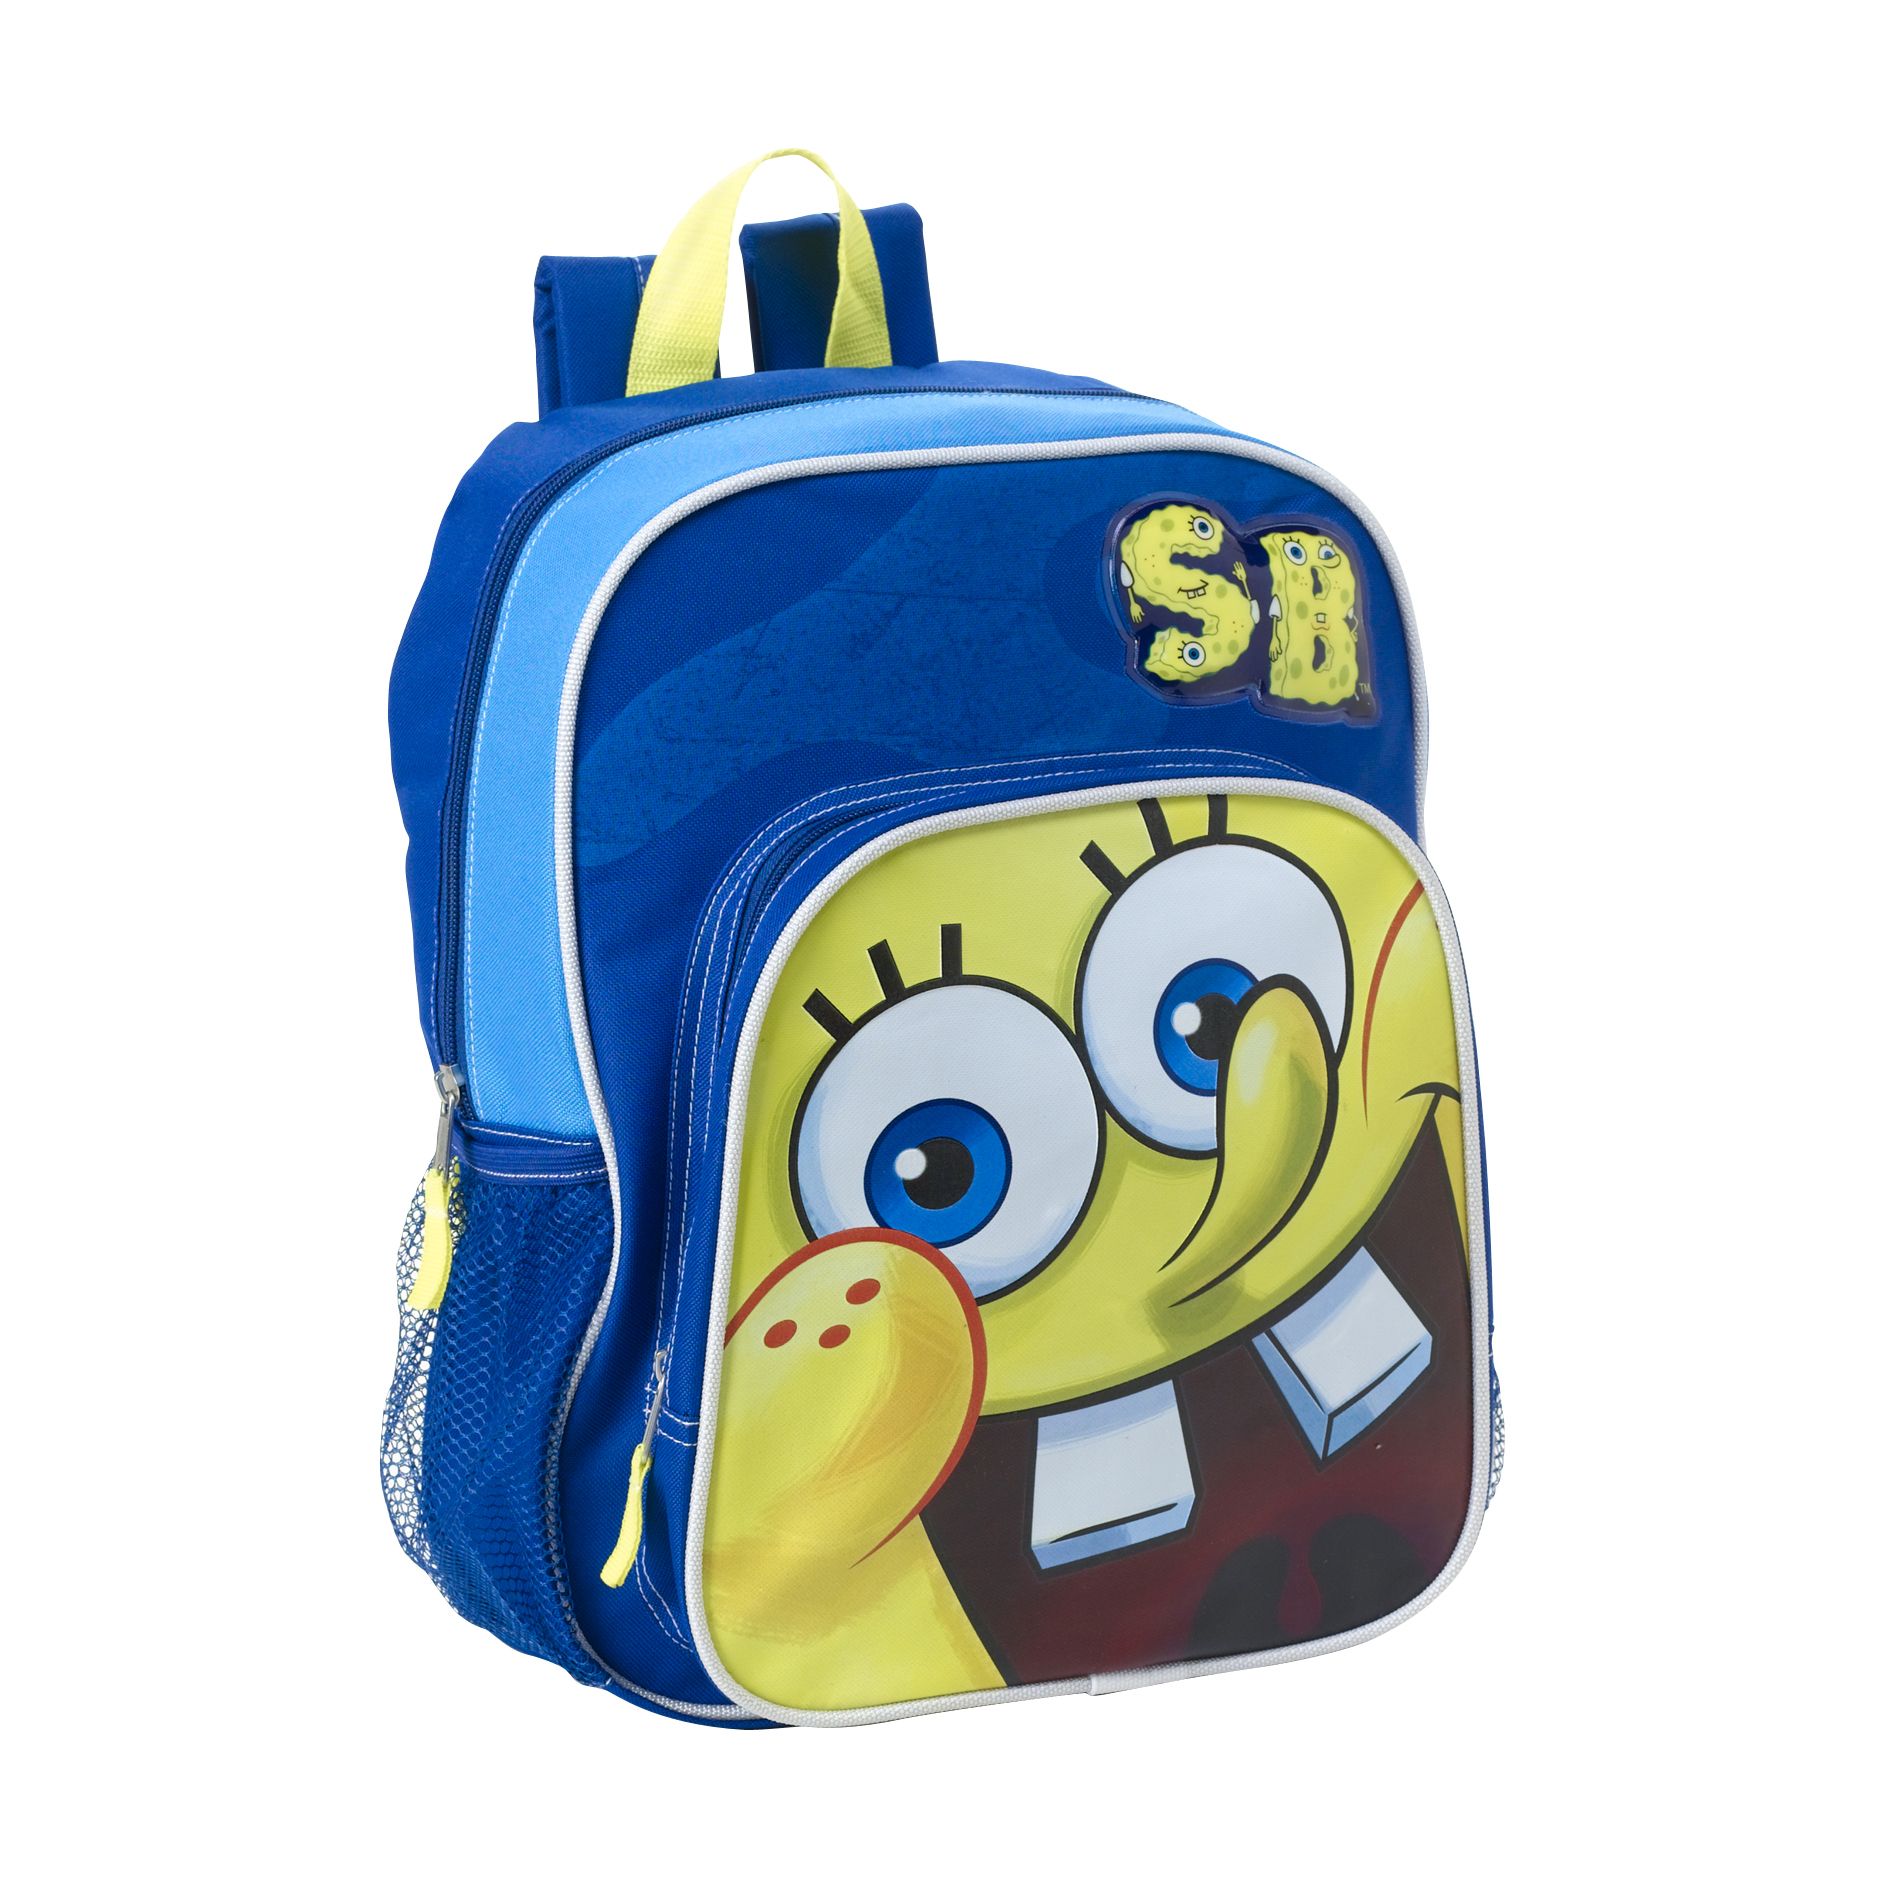 Nickelodeon Square Pants Face Blue Design Front Zip Around Double Side Pouch Backpack